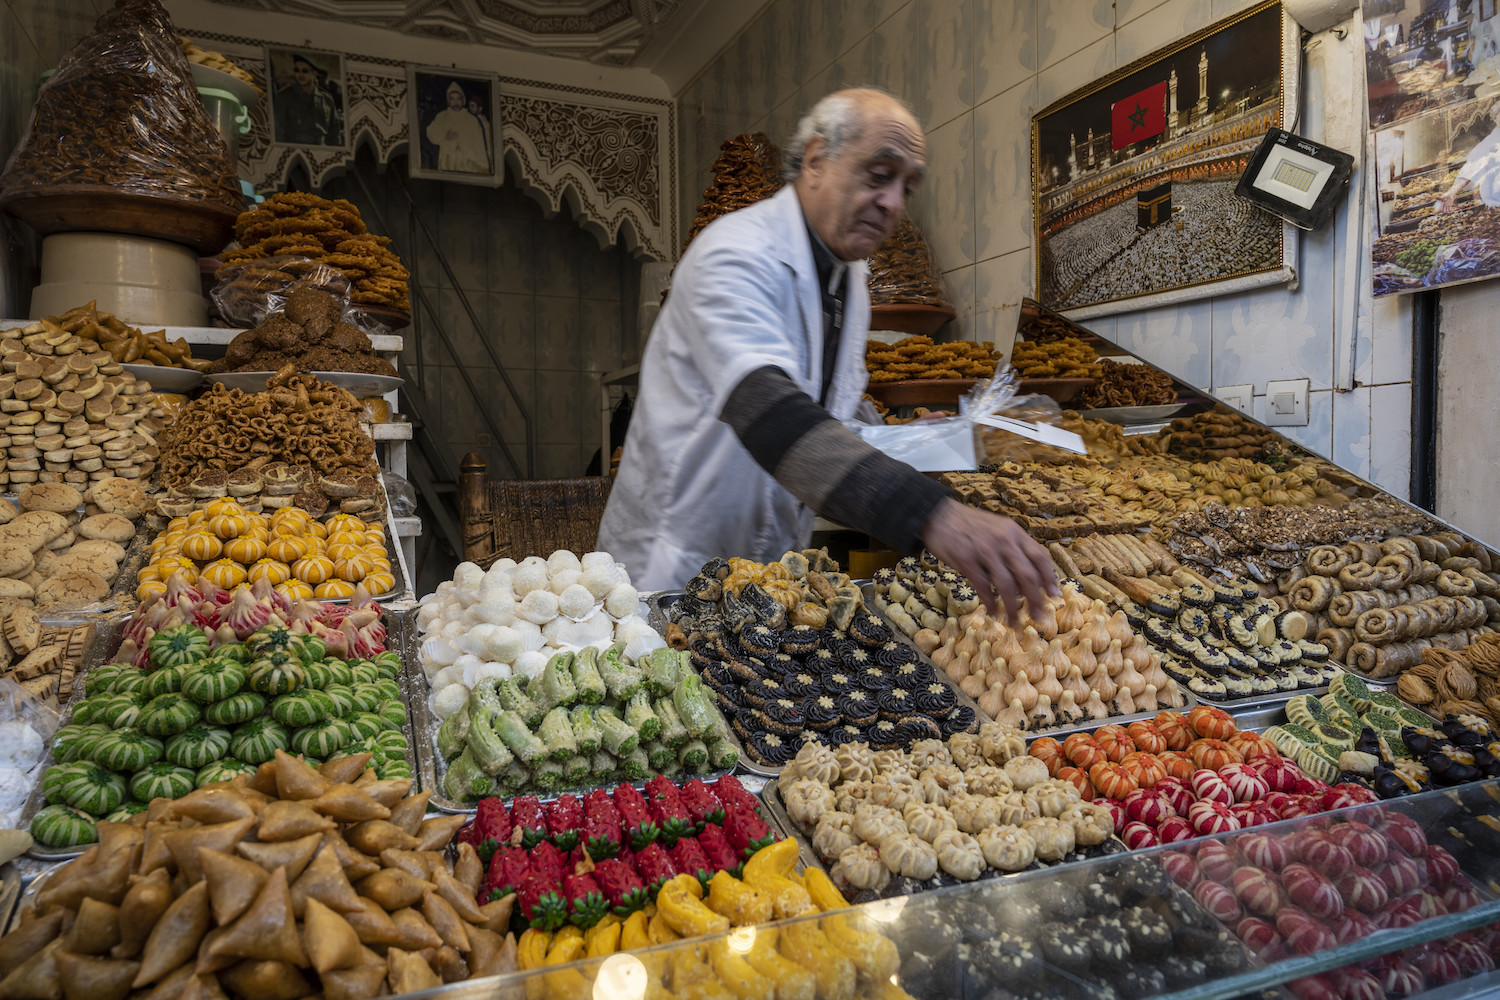 A pastry chef sells typical Moroccan sweets in The Medina